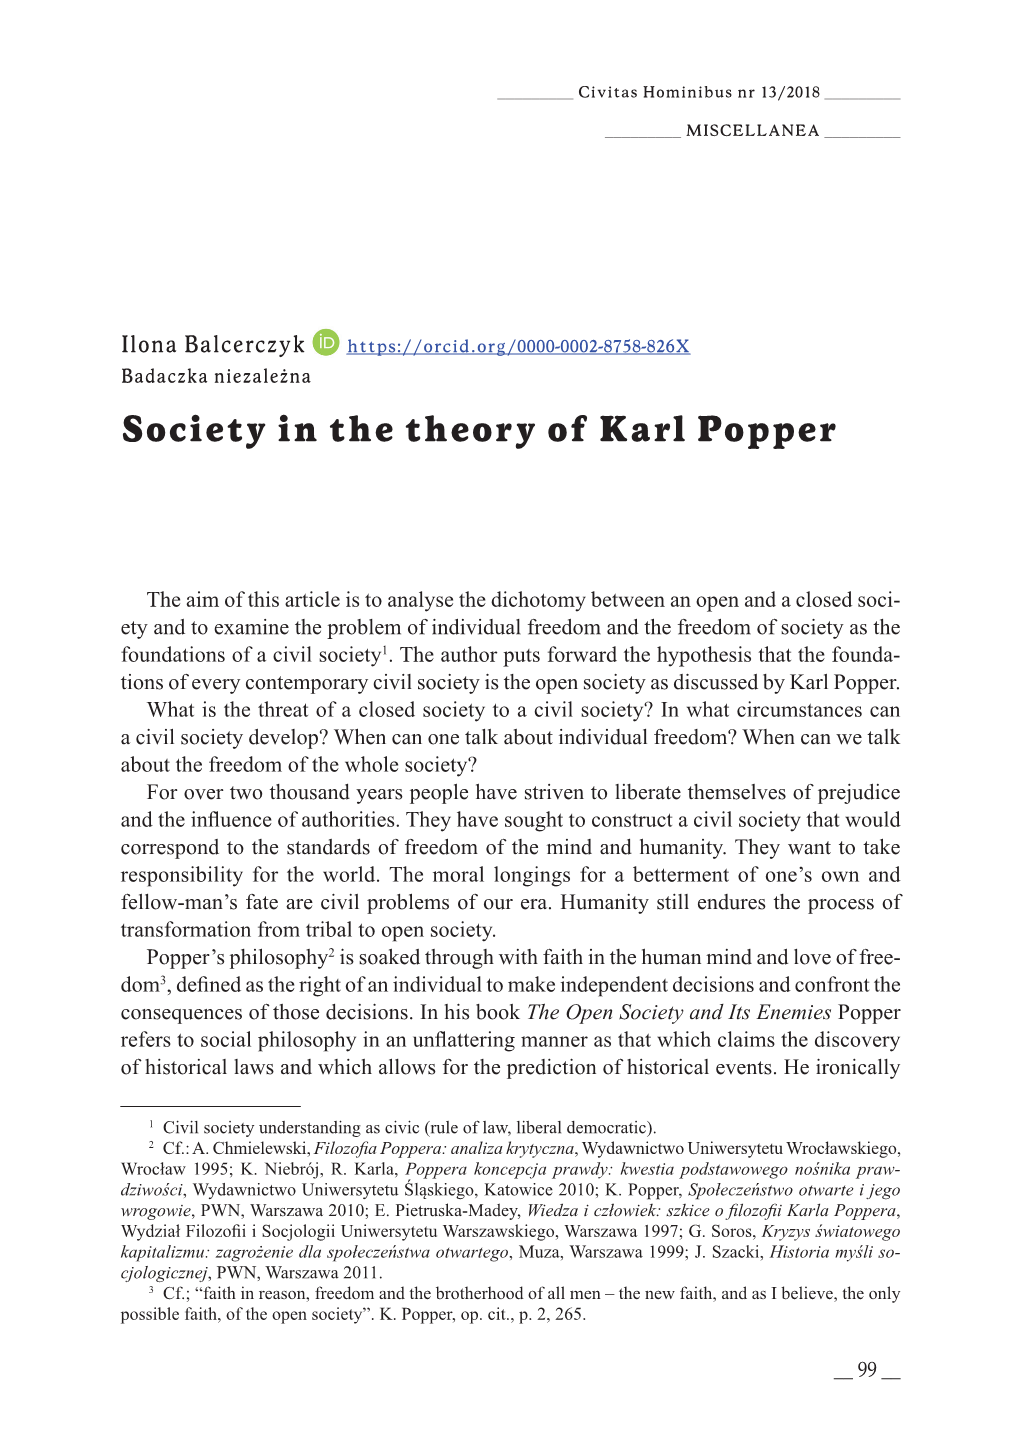 Society in the Theory of Karl Popper